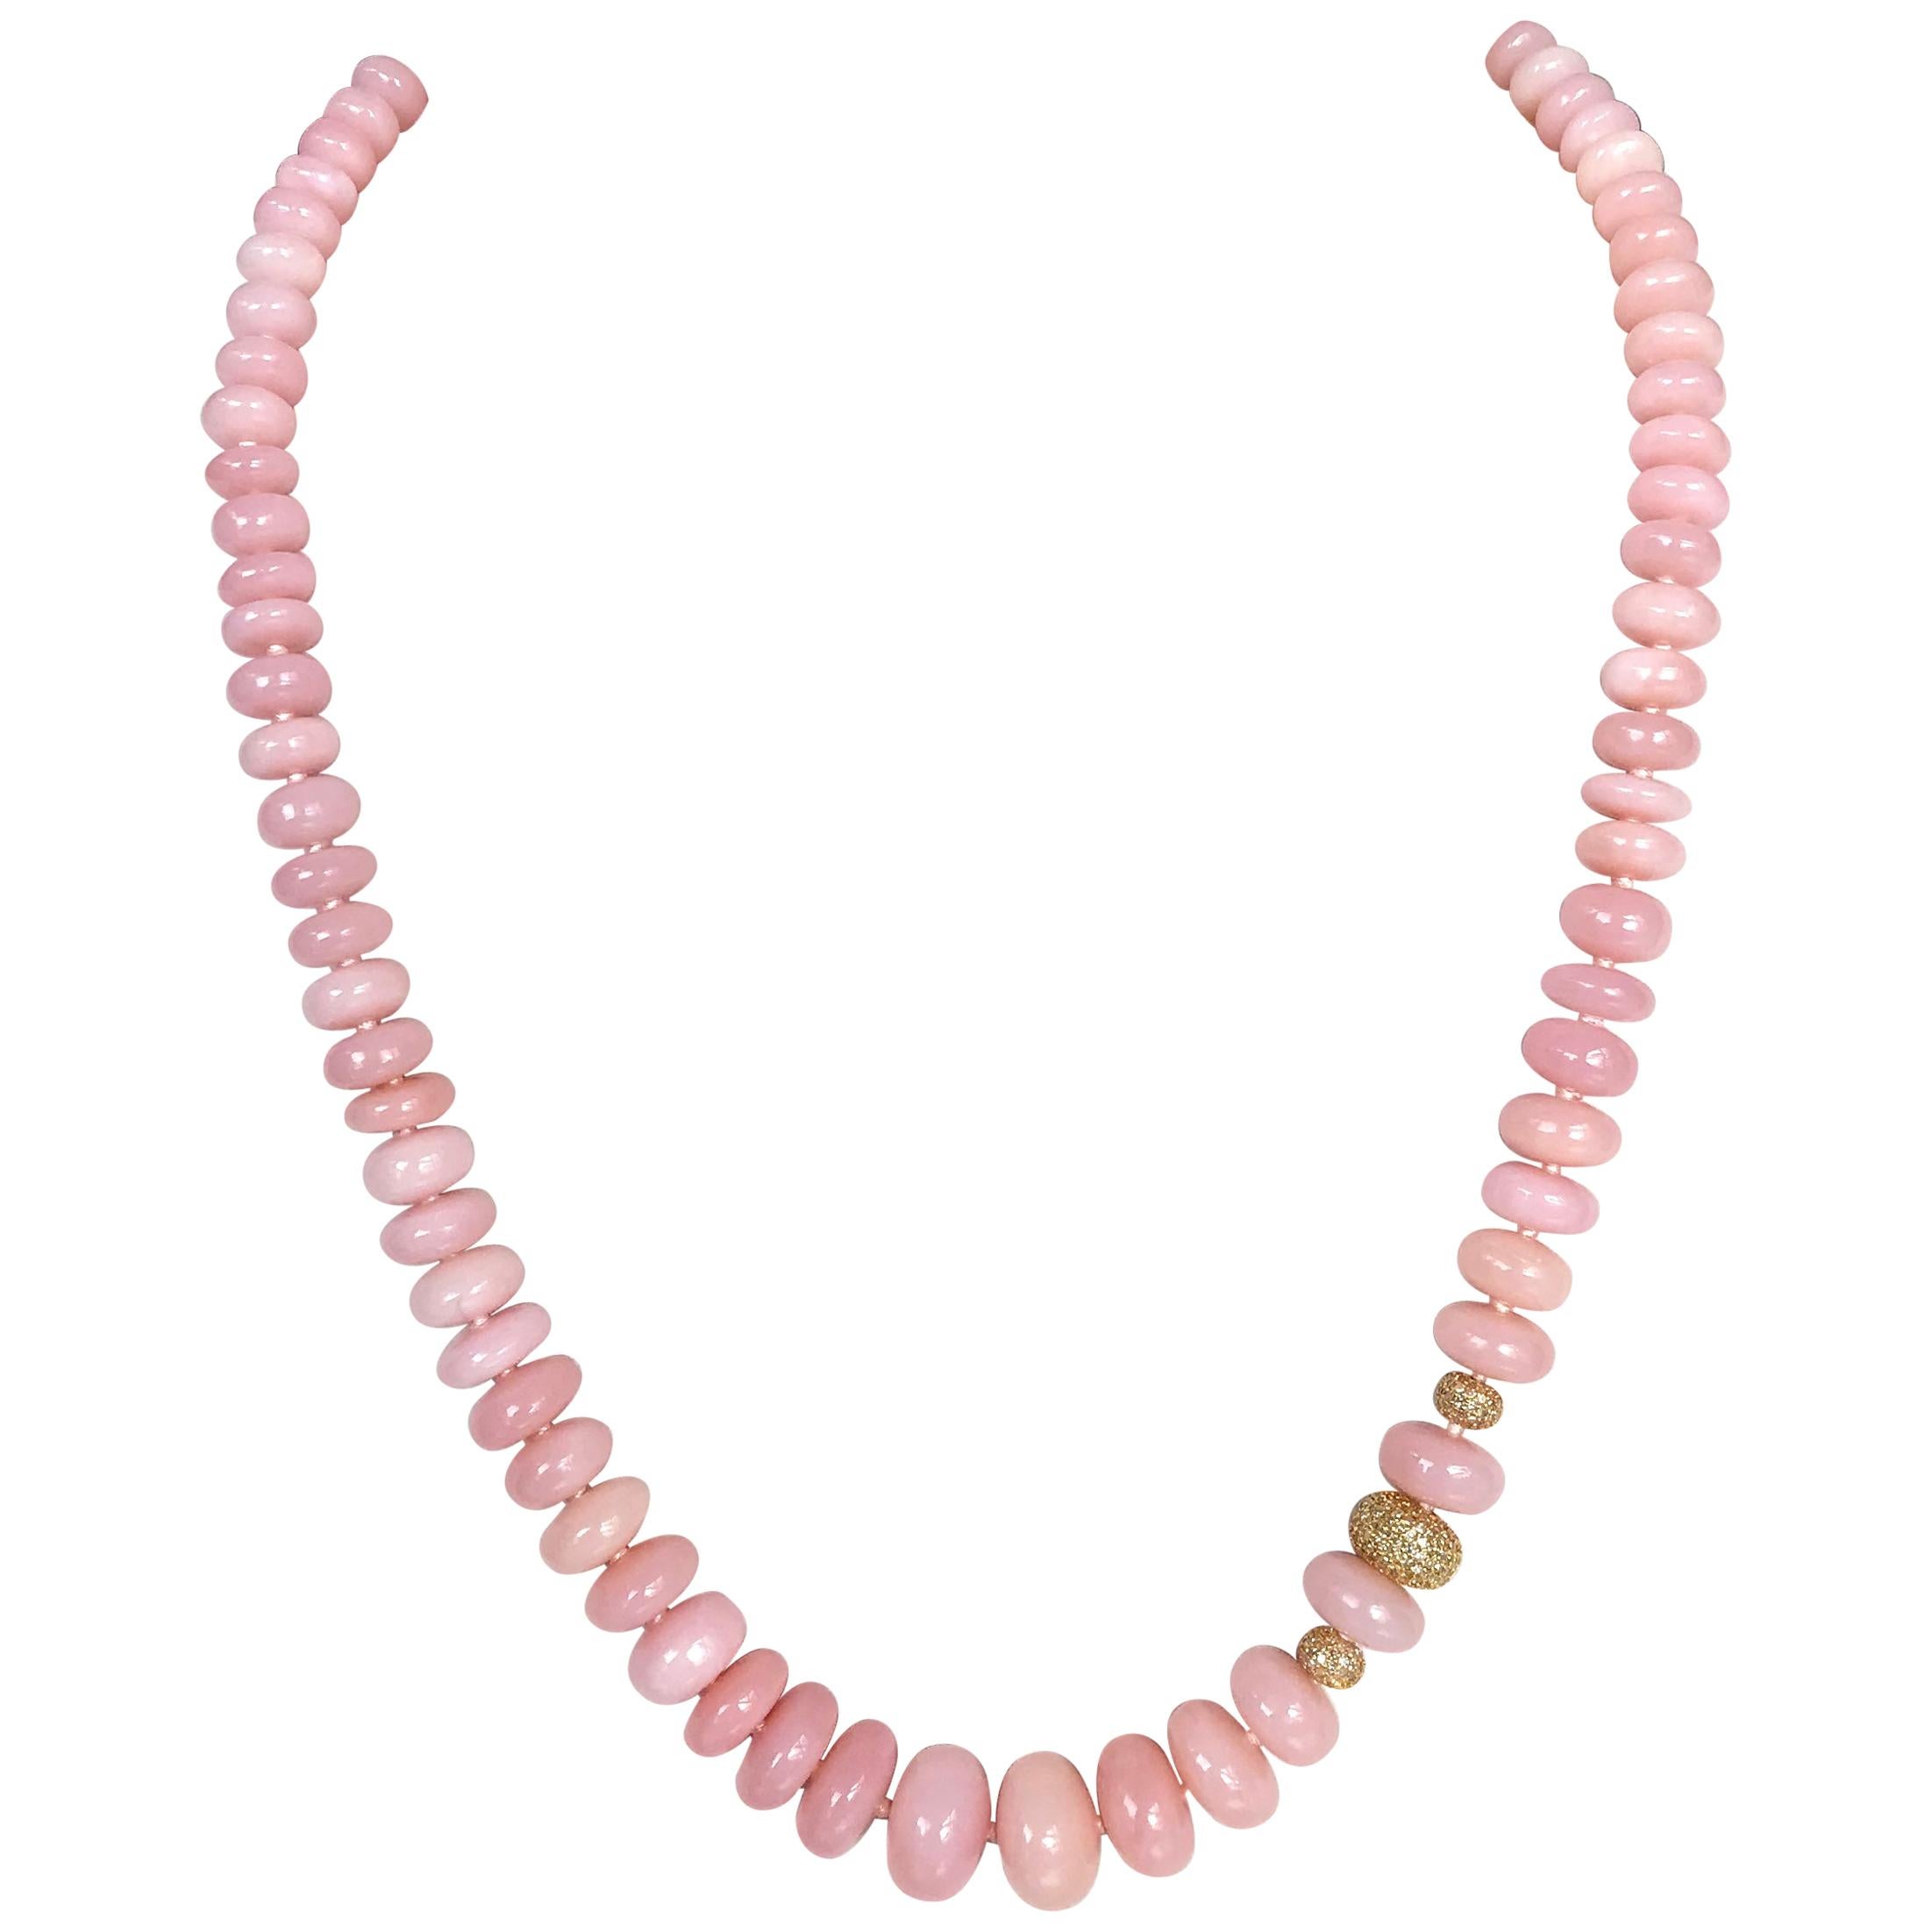  14 Karat Yellow Gold Pink Opal Beaded Necklace with Diamond Beads and Clasp